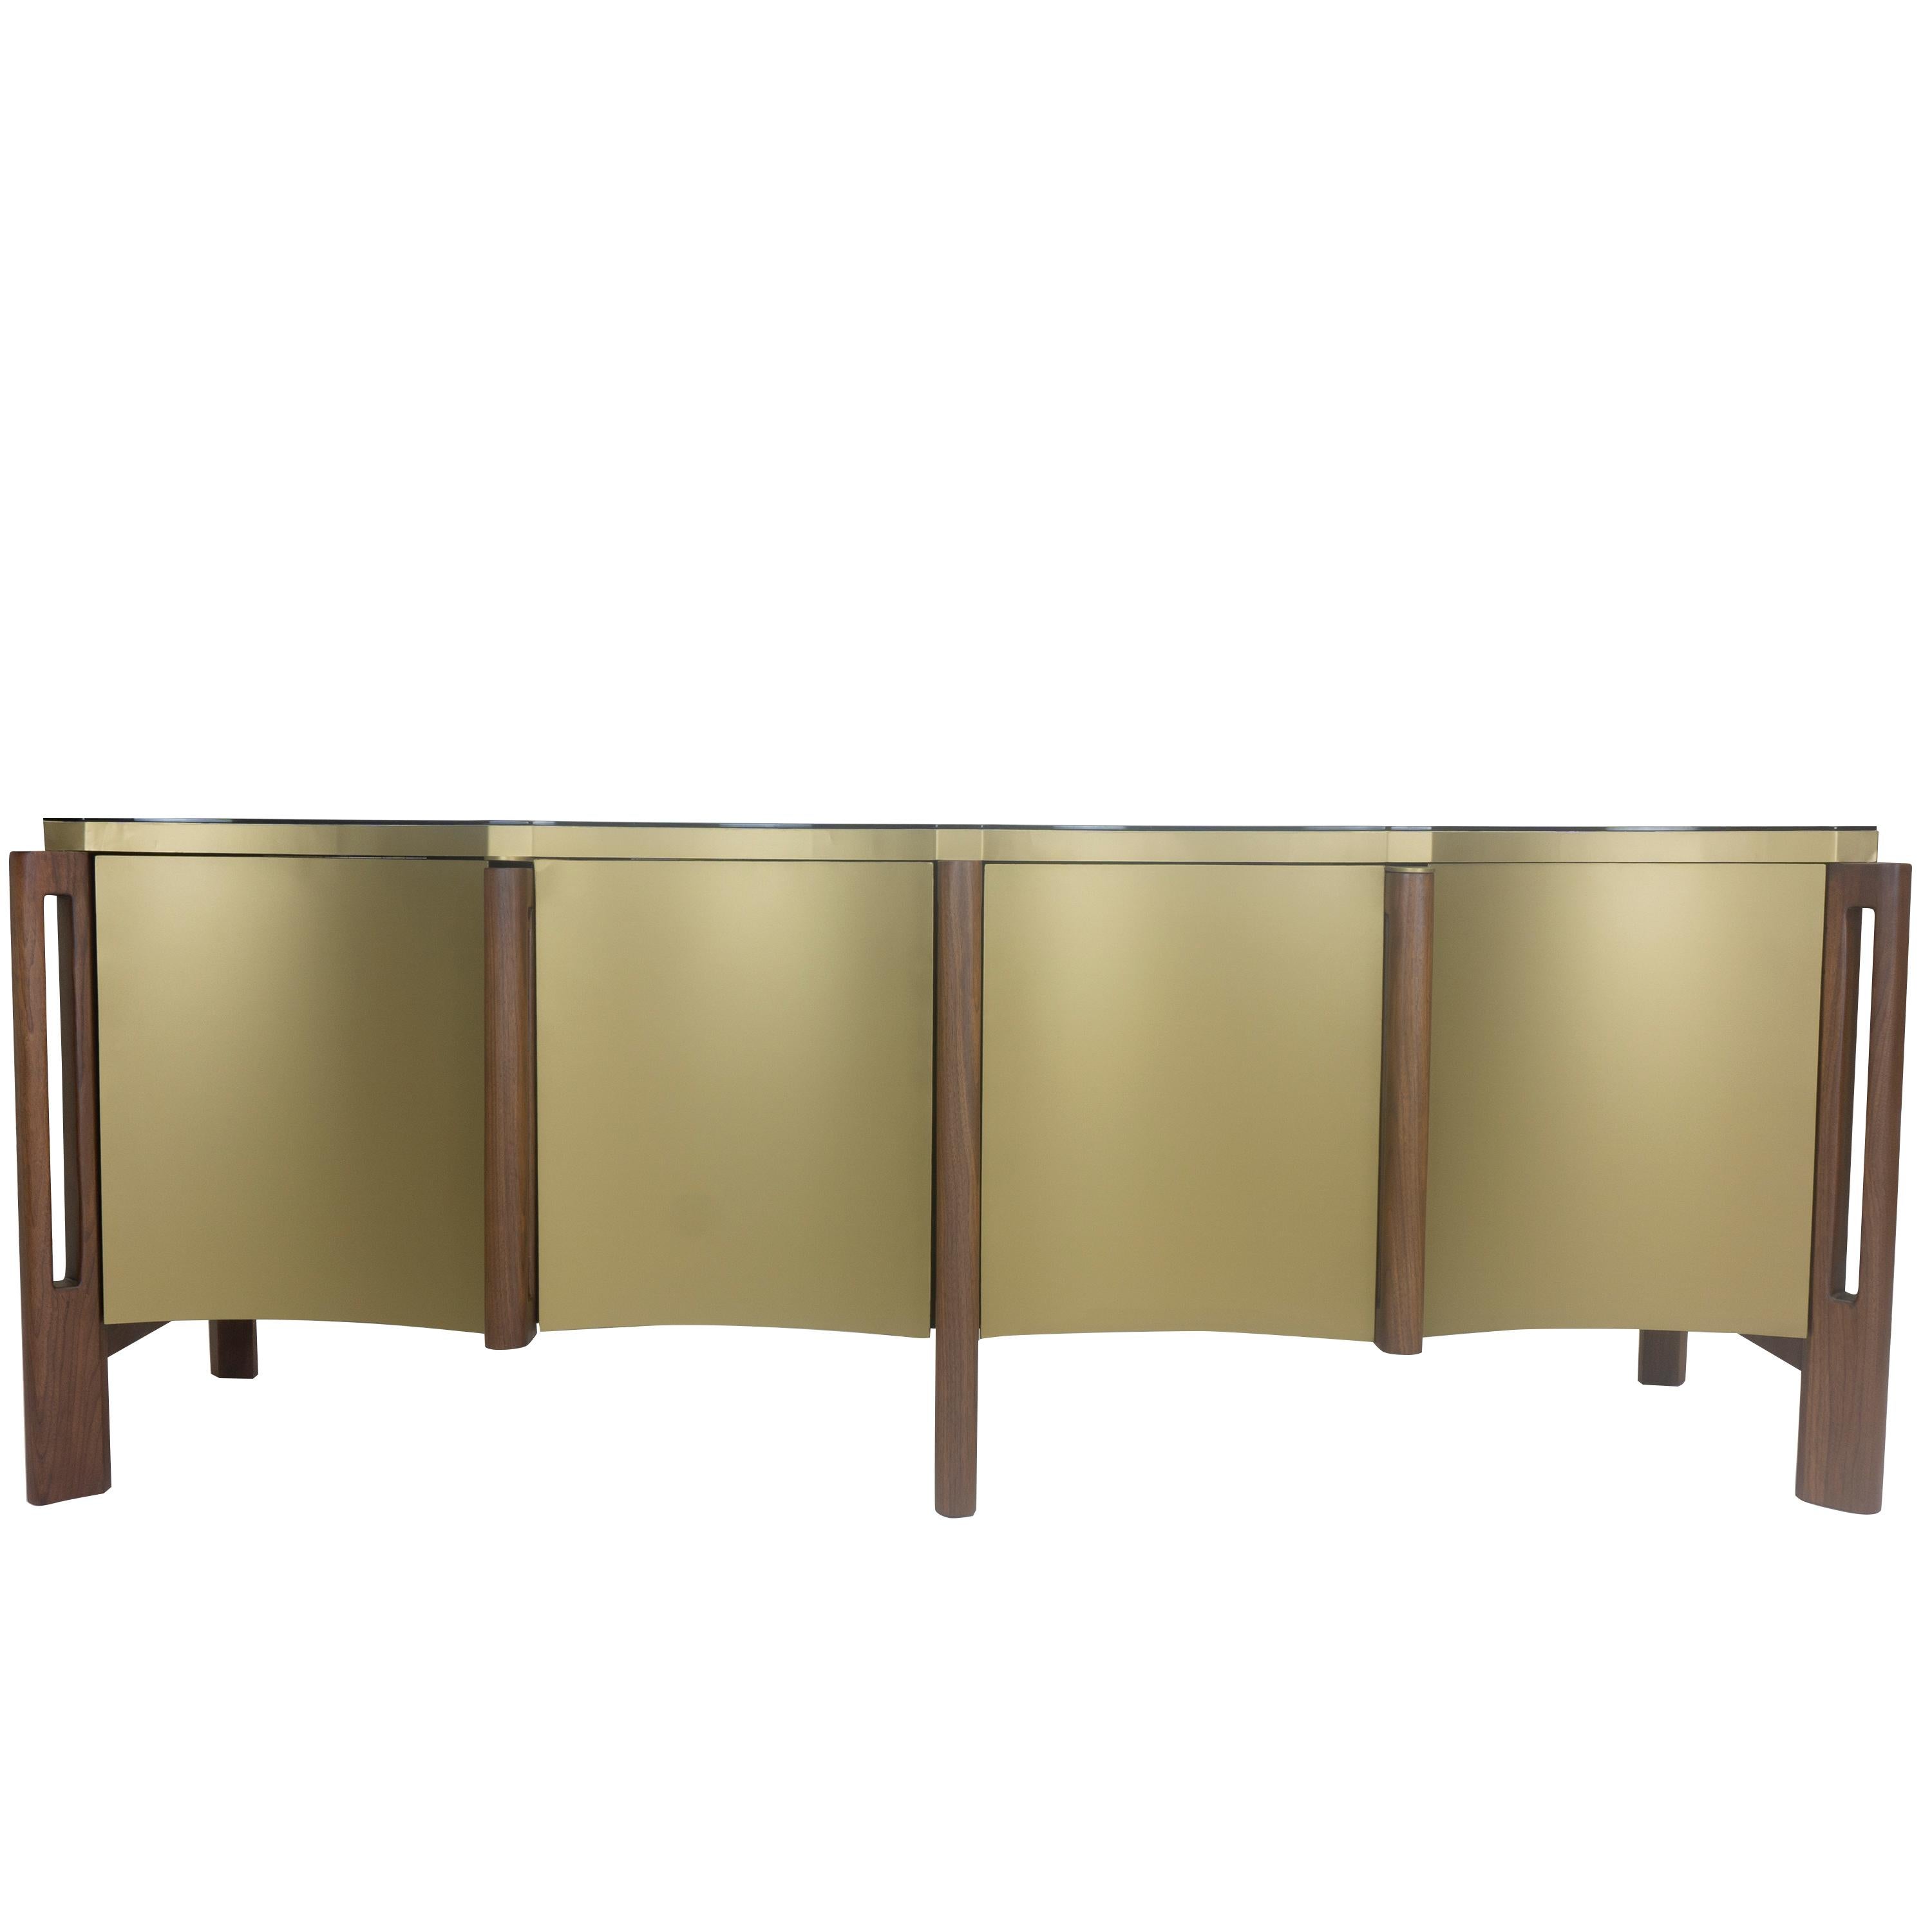 Handmade in Norwalk, Connecticut USA, this buffet features a solid walnut frame, painted brass, scalloped doors and a smoked glass top.
The 1/4